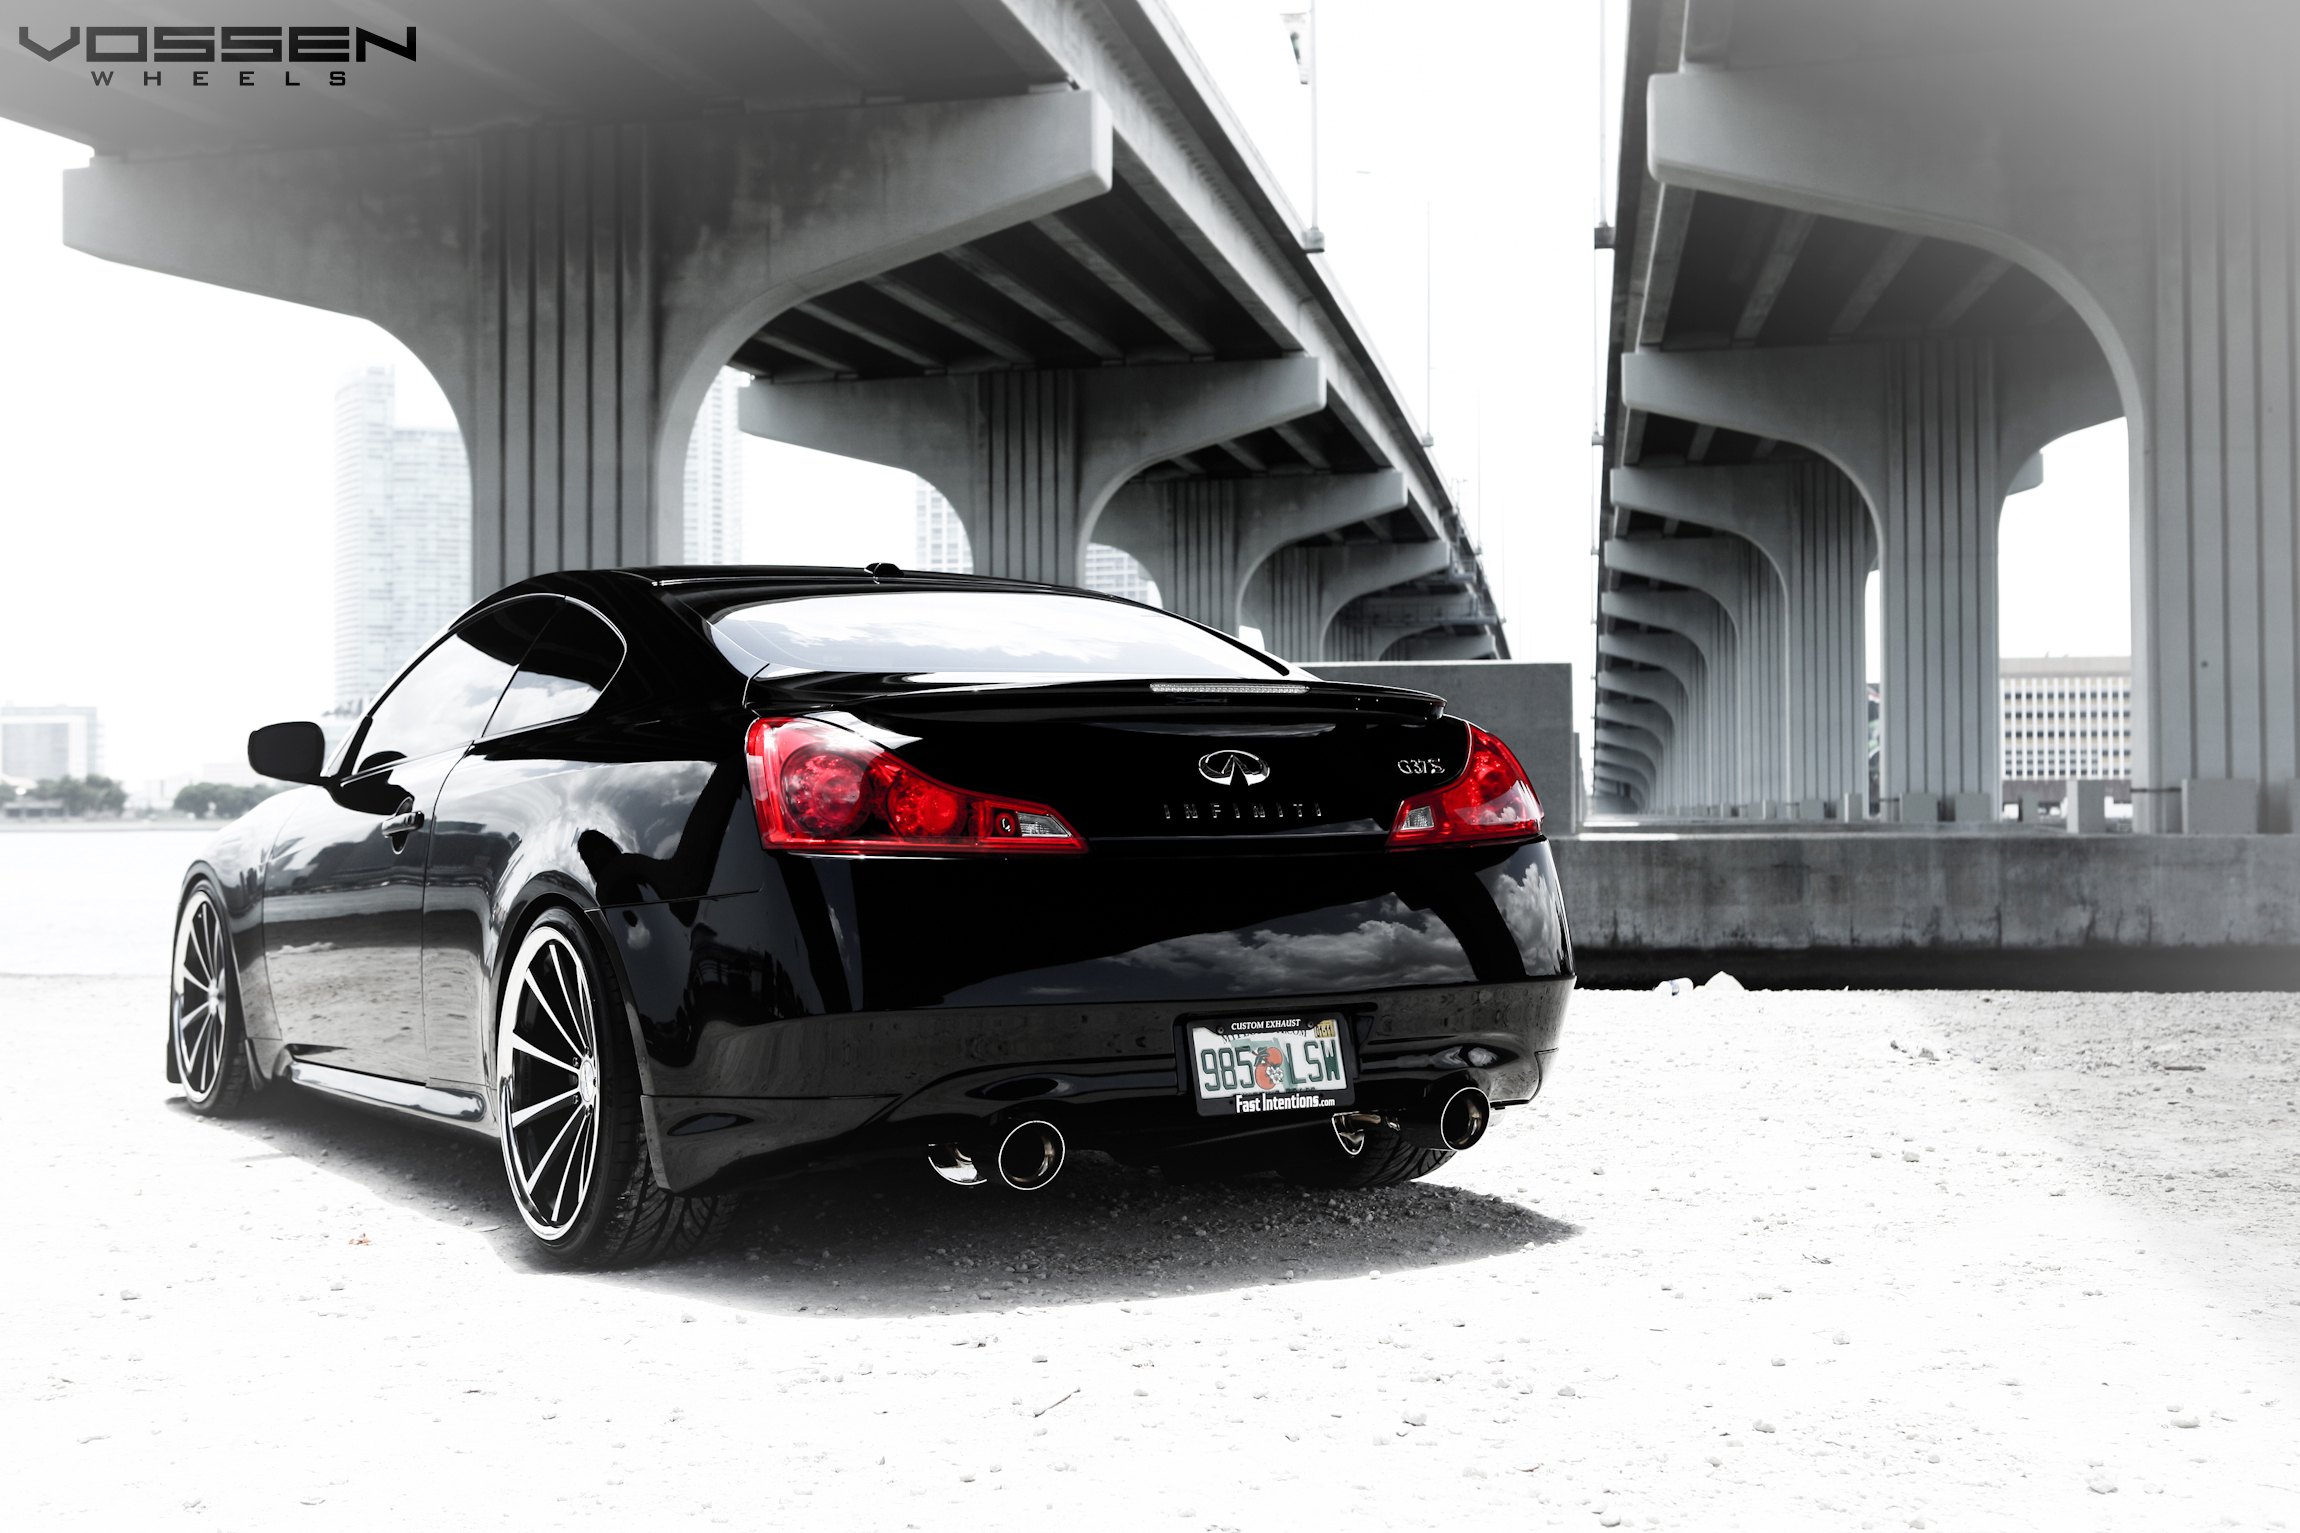 Red LED Taillights on Gloss Black Infiniti G37 - Photo by Vossen